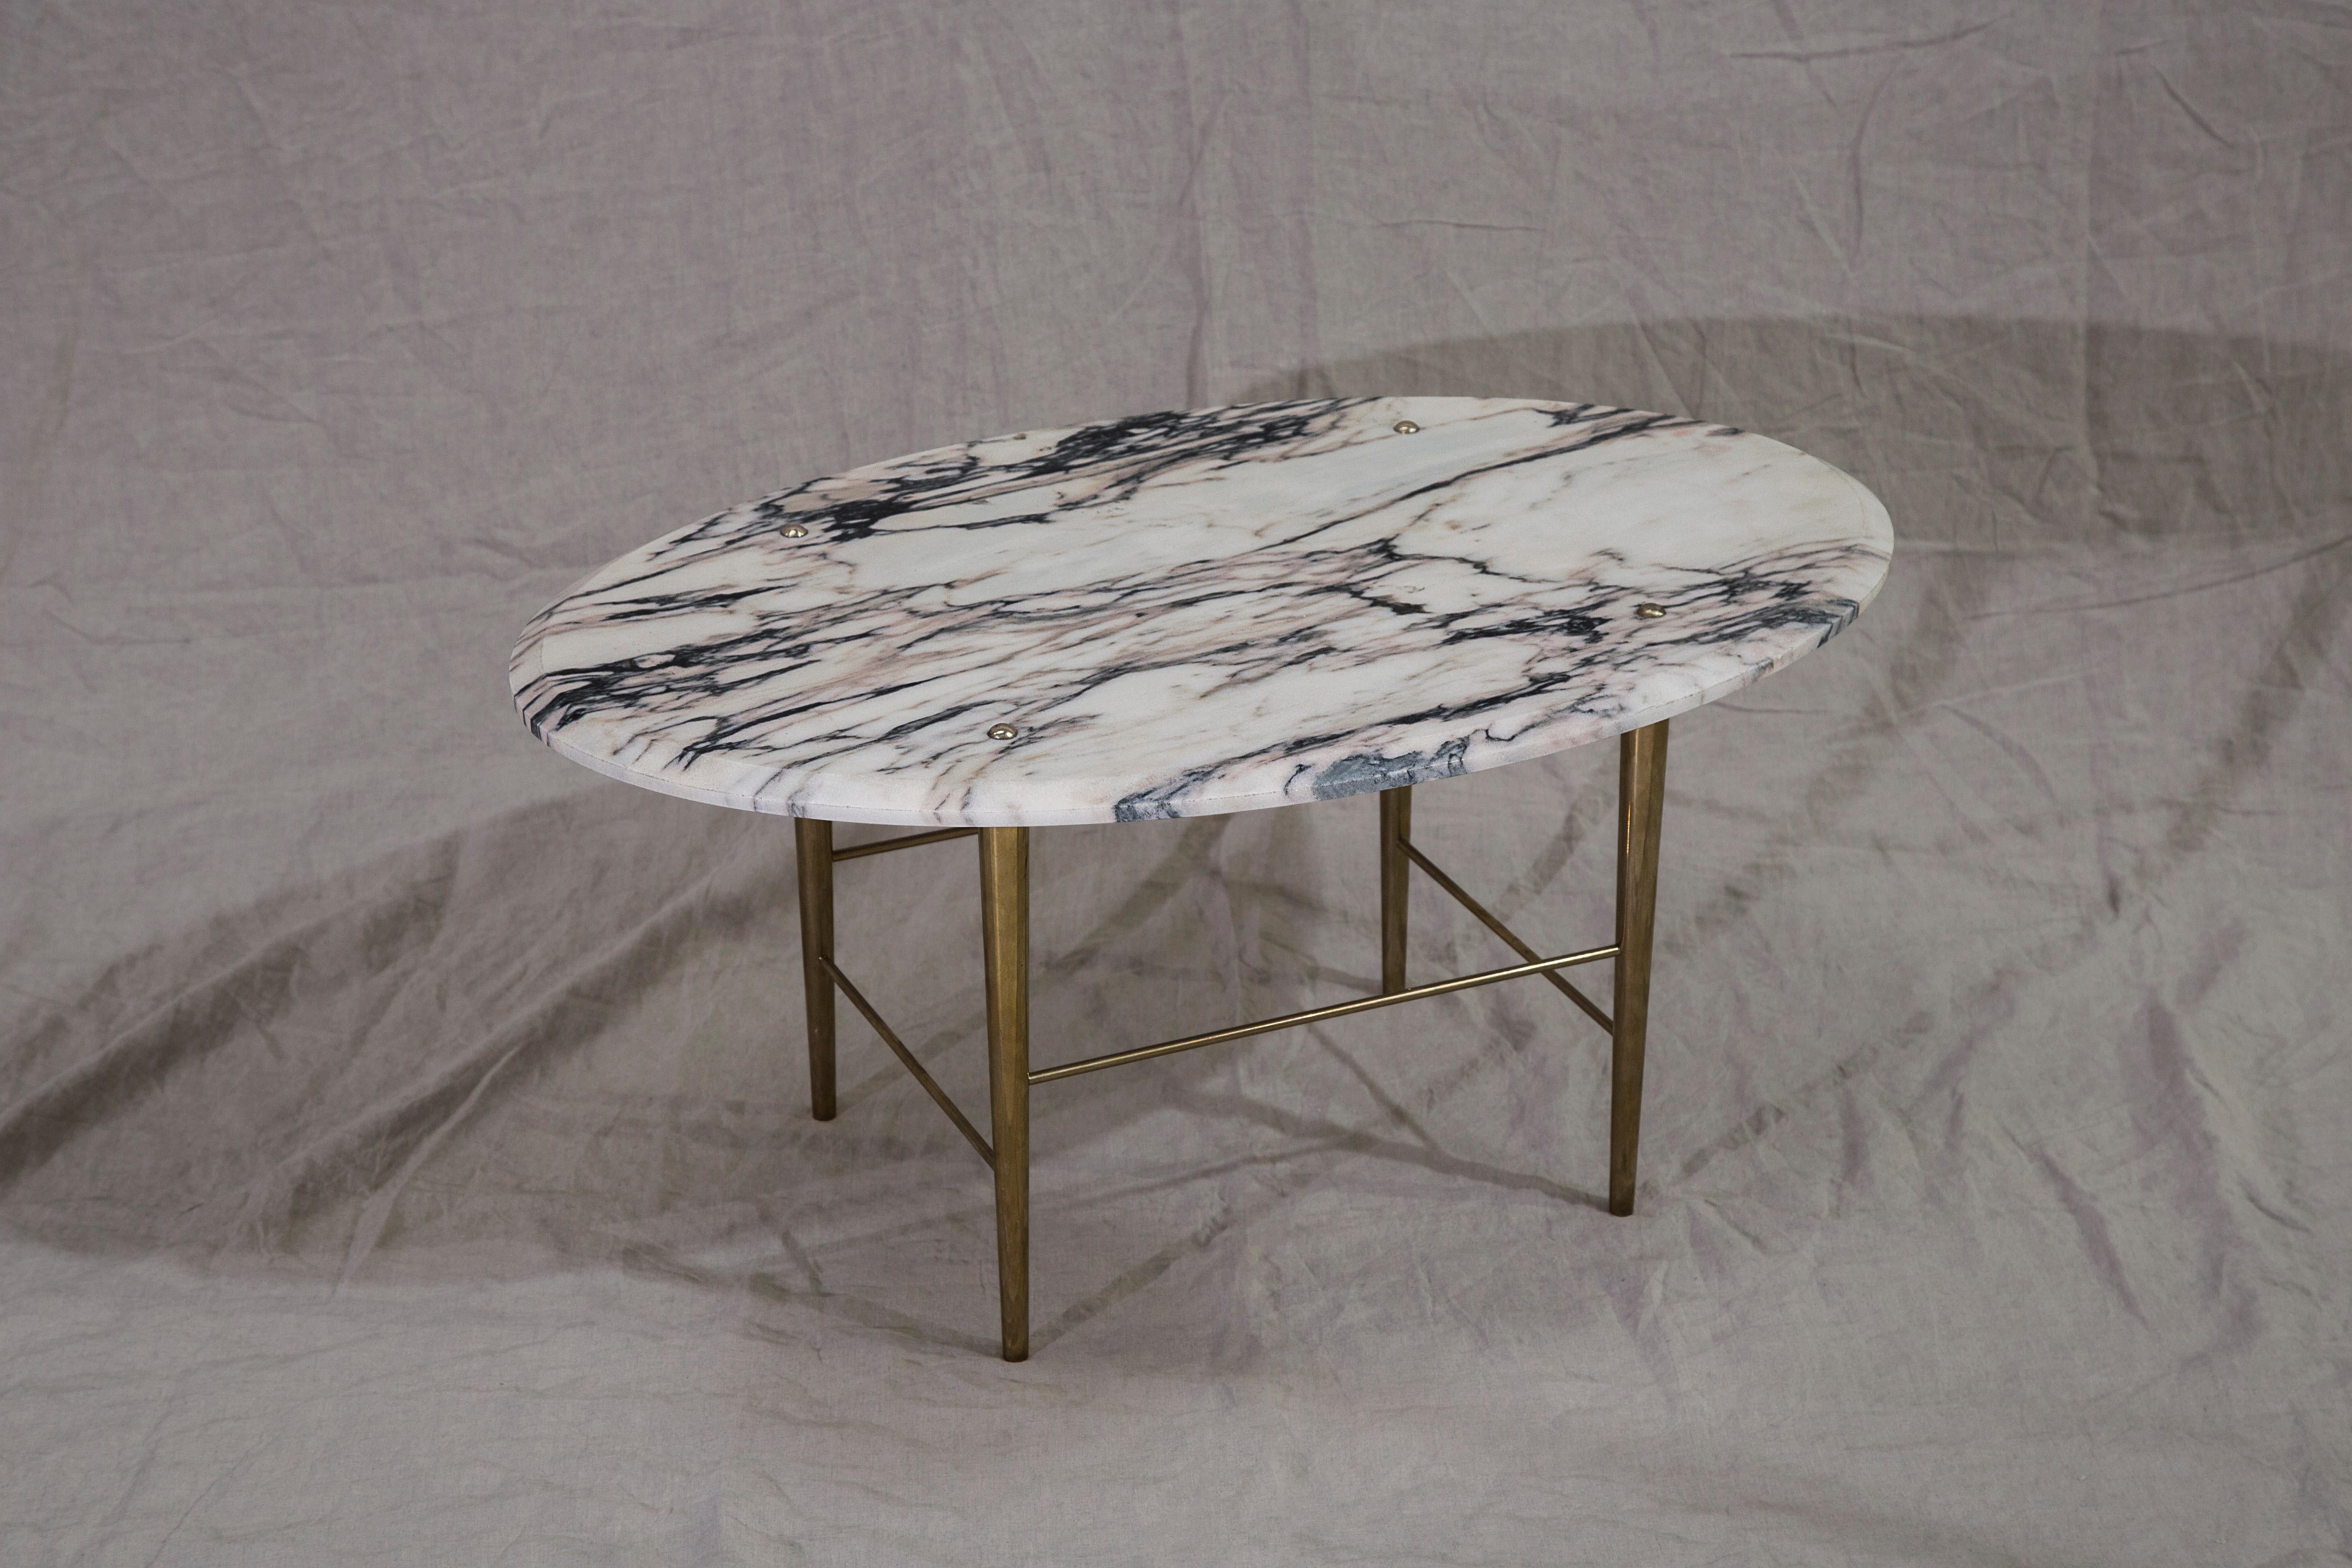 A coffee table in Portuguese marble and polished brass. handcrafted to order in Northern England.

Measures: 1000 mm (L) x 640 mm (W) x 400 mm (H)

Bespoke sizes and finishes available.